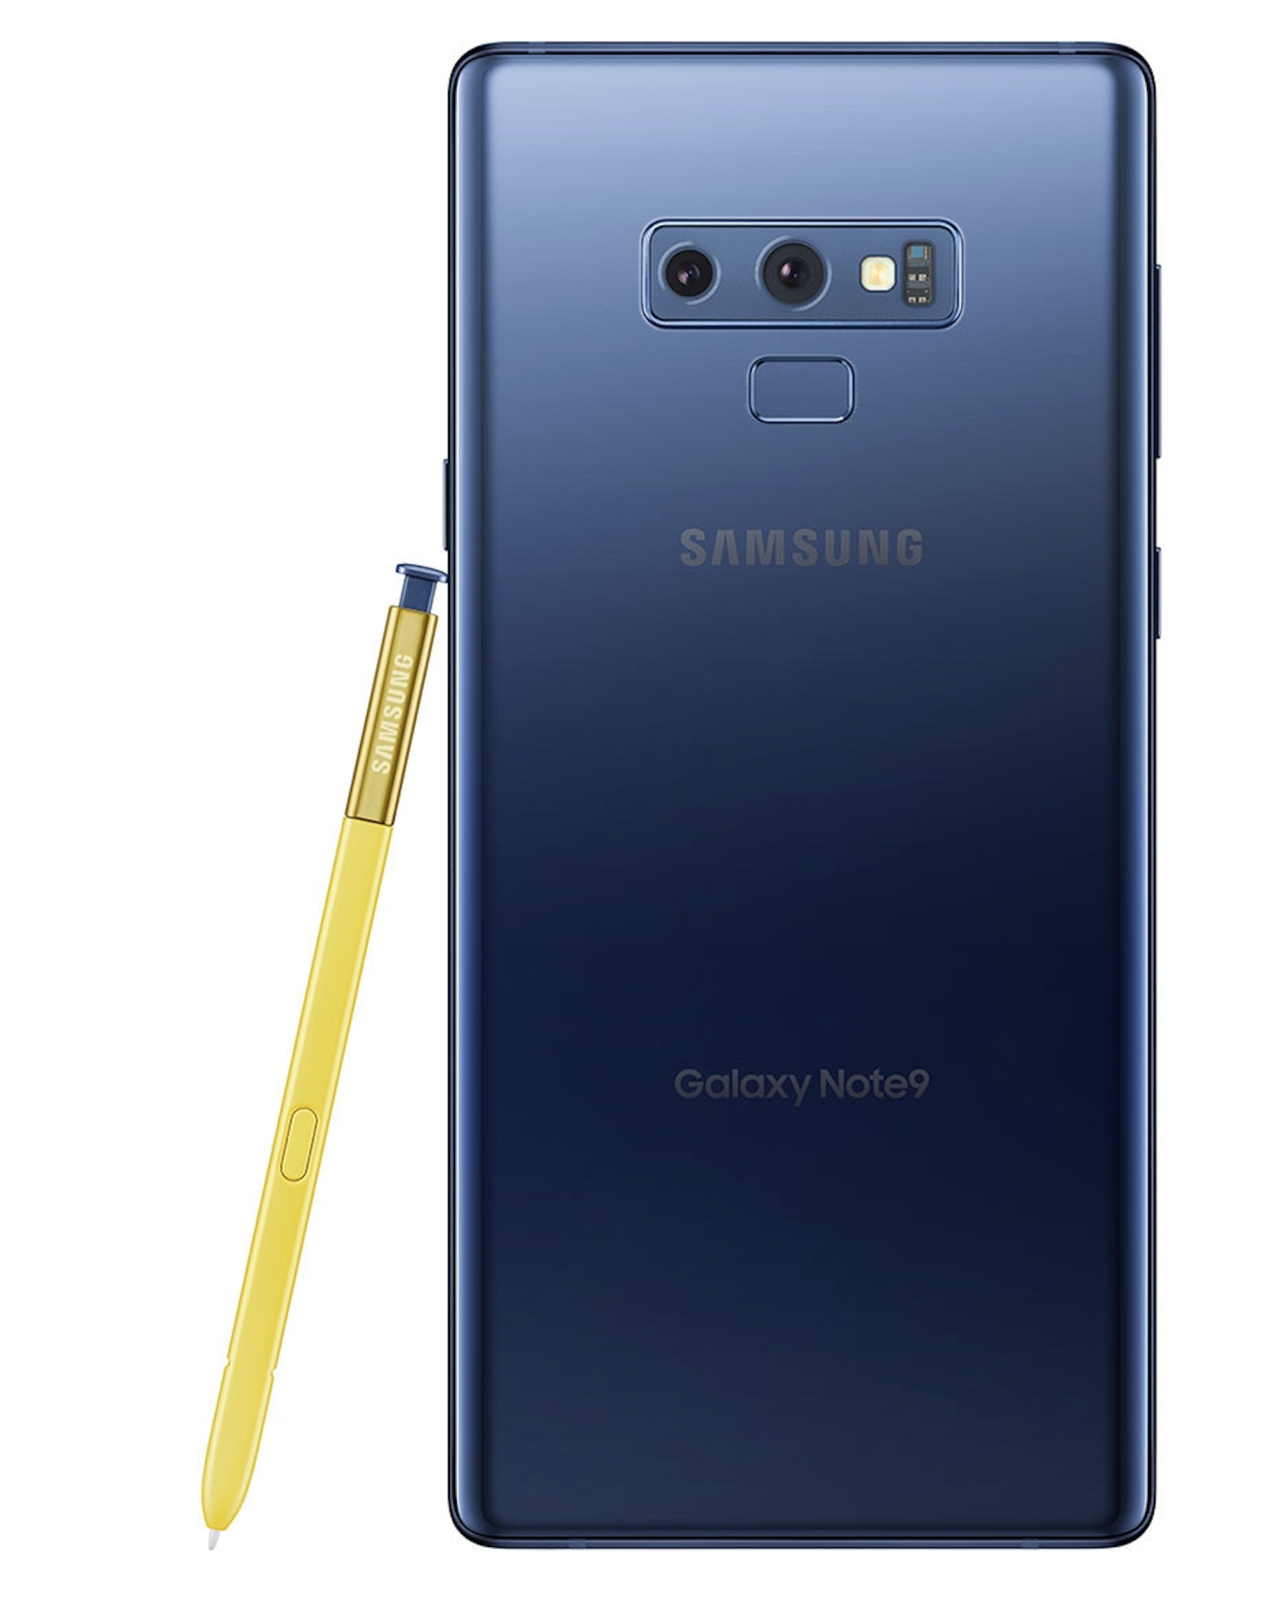 overzien vooroordeel Componist Samsung Galaxy Note 9 set for January 15 update to Android 9 Pie -  NotebookCheck.net News